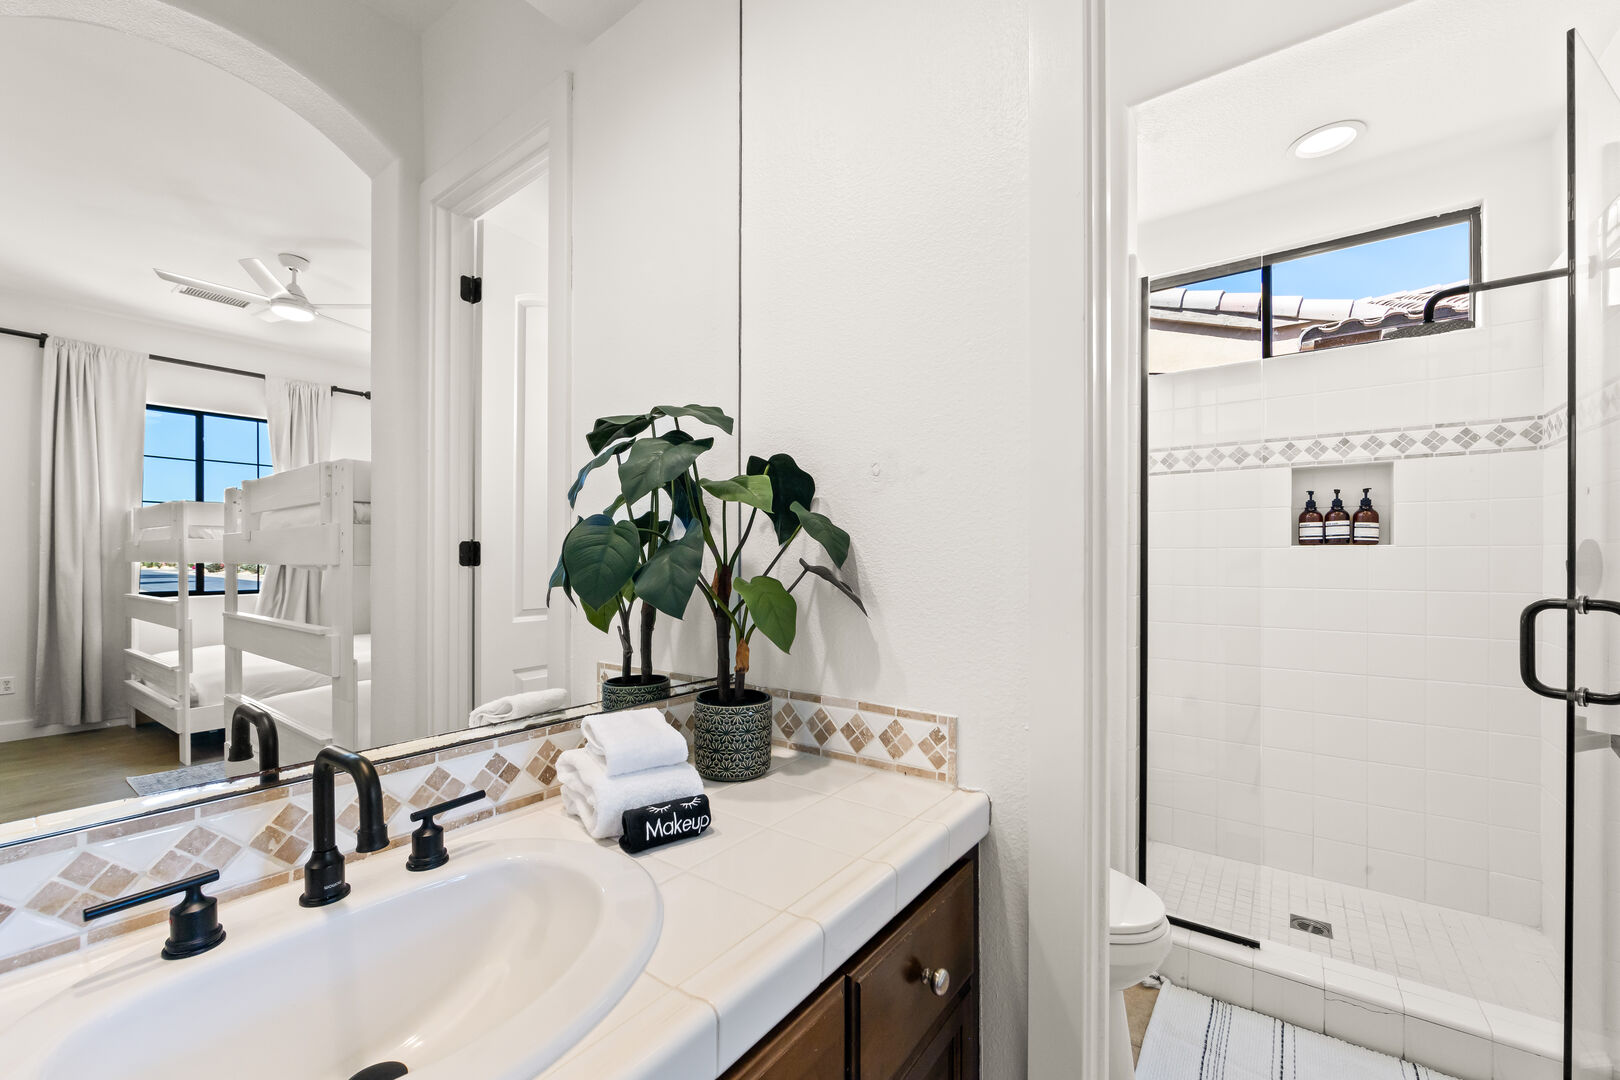 The private ensuite bathroom features a step-in tile shower with a built-in raised bench and a decorative vanity sink.